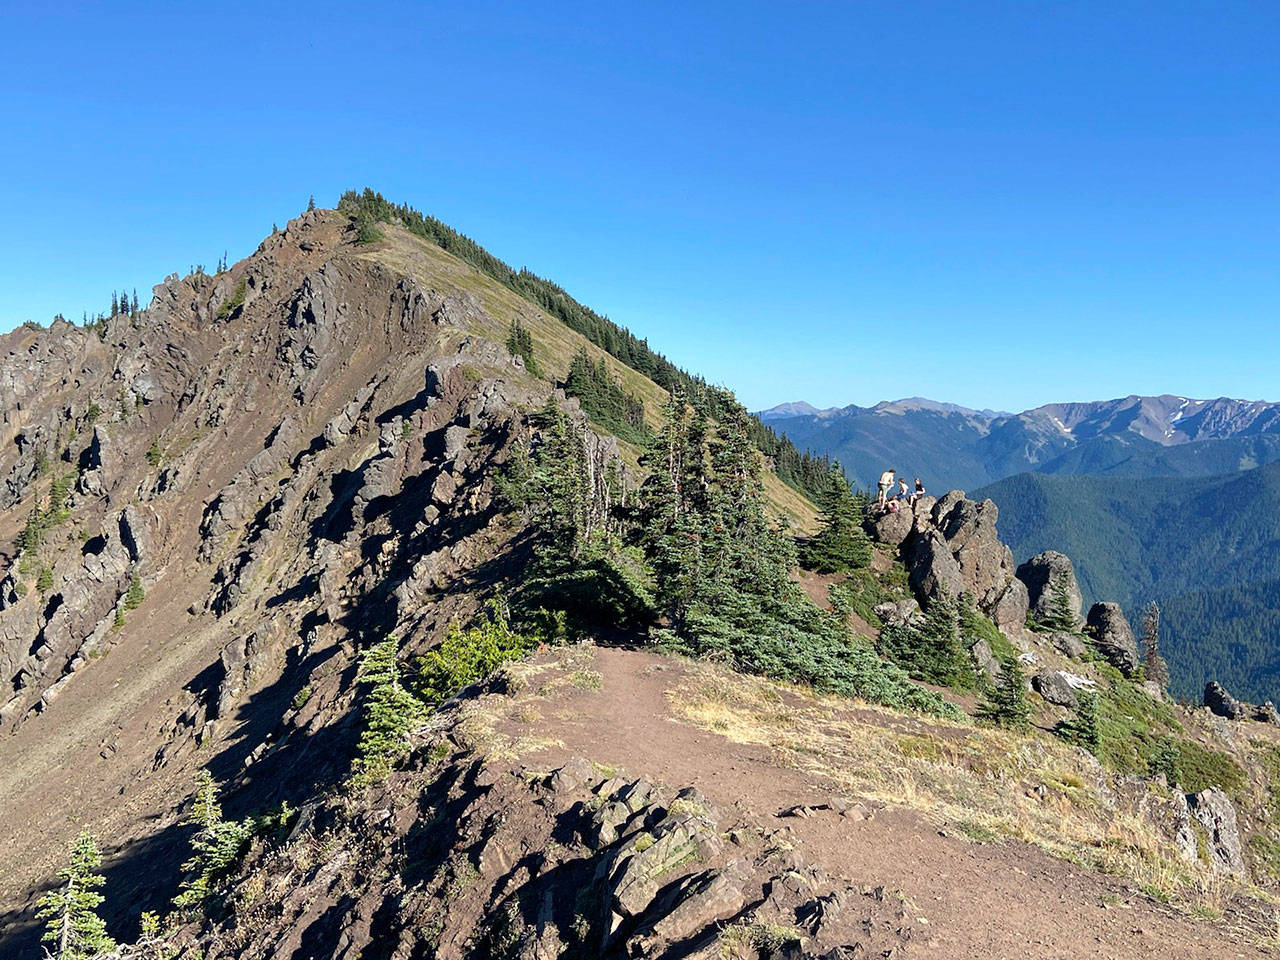 Hikers stop to rest on Klahhane Ridge at the top of Switchback trail on Friday, Aug. 28, 2020. (Rob Ollikainen/Peninsula Daily News)